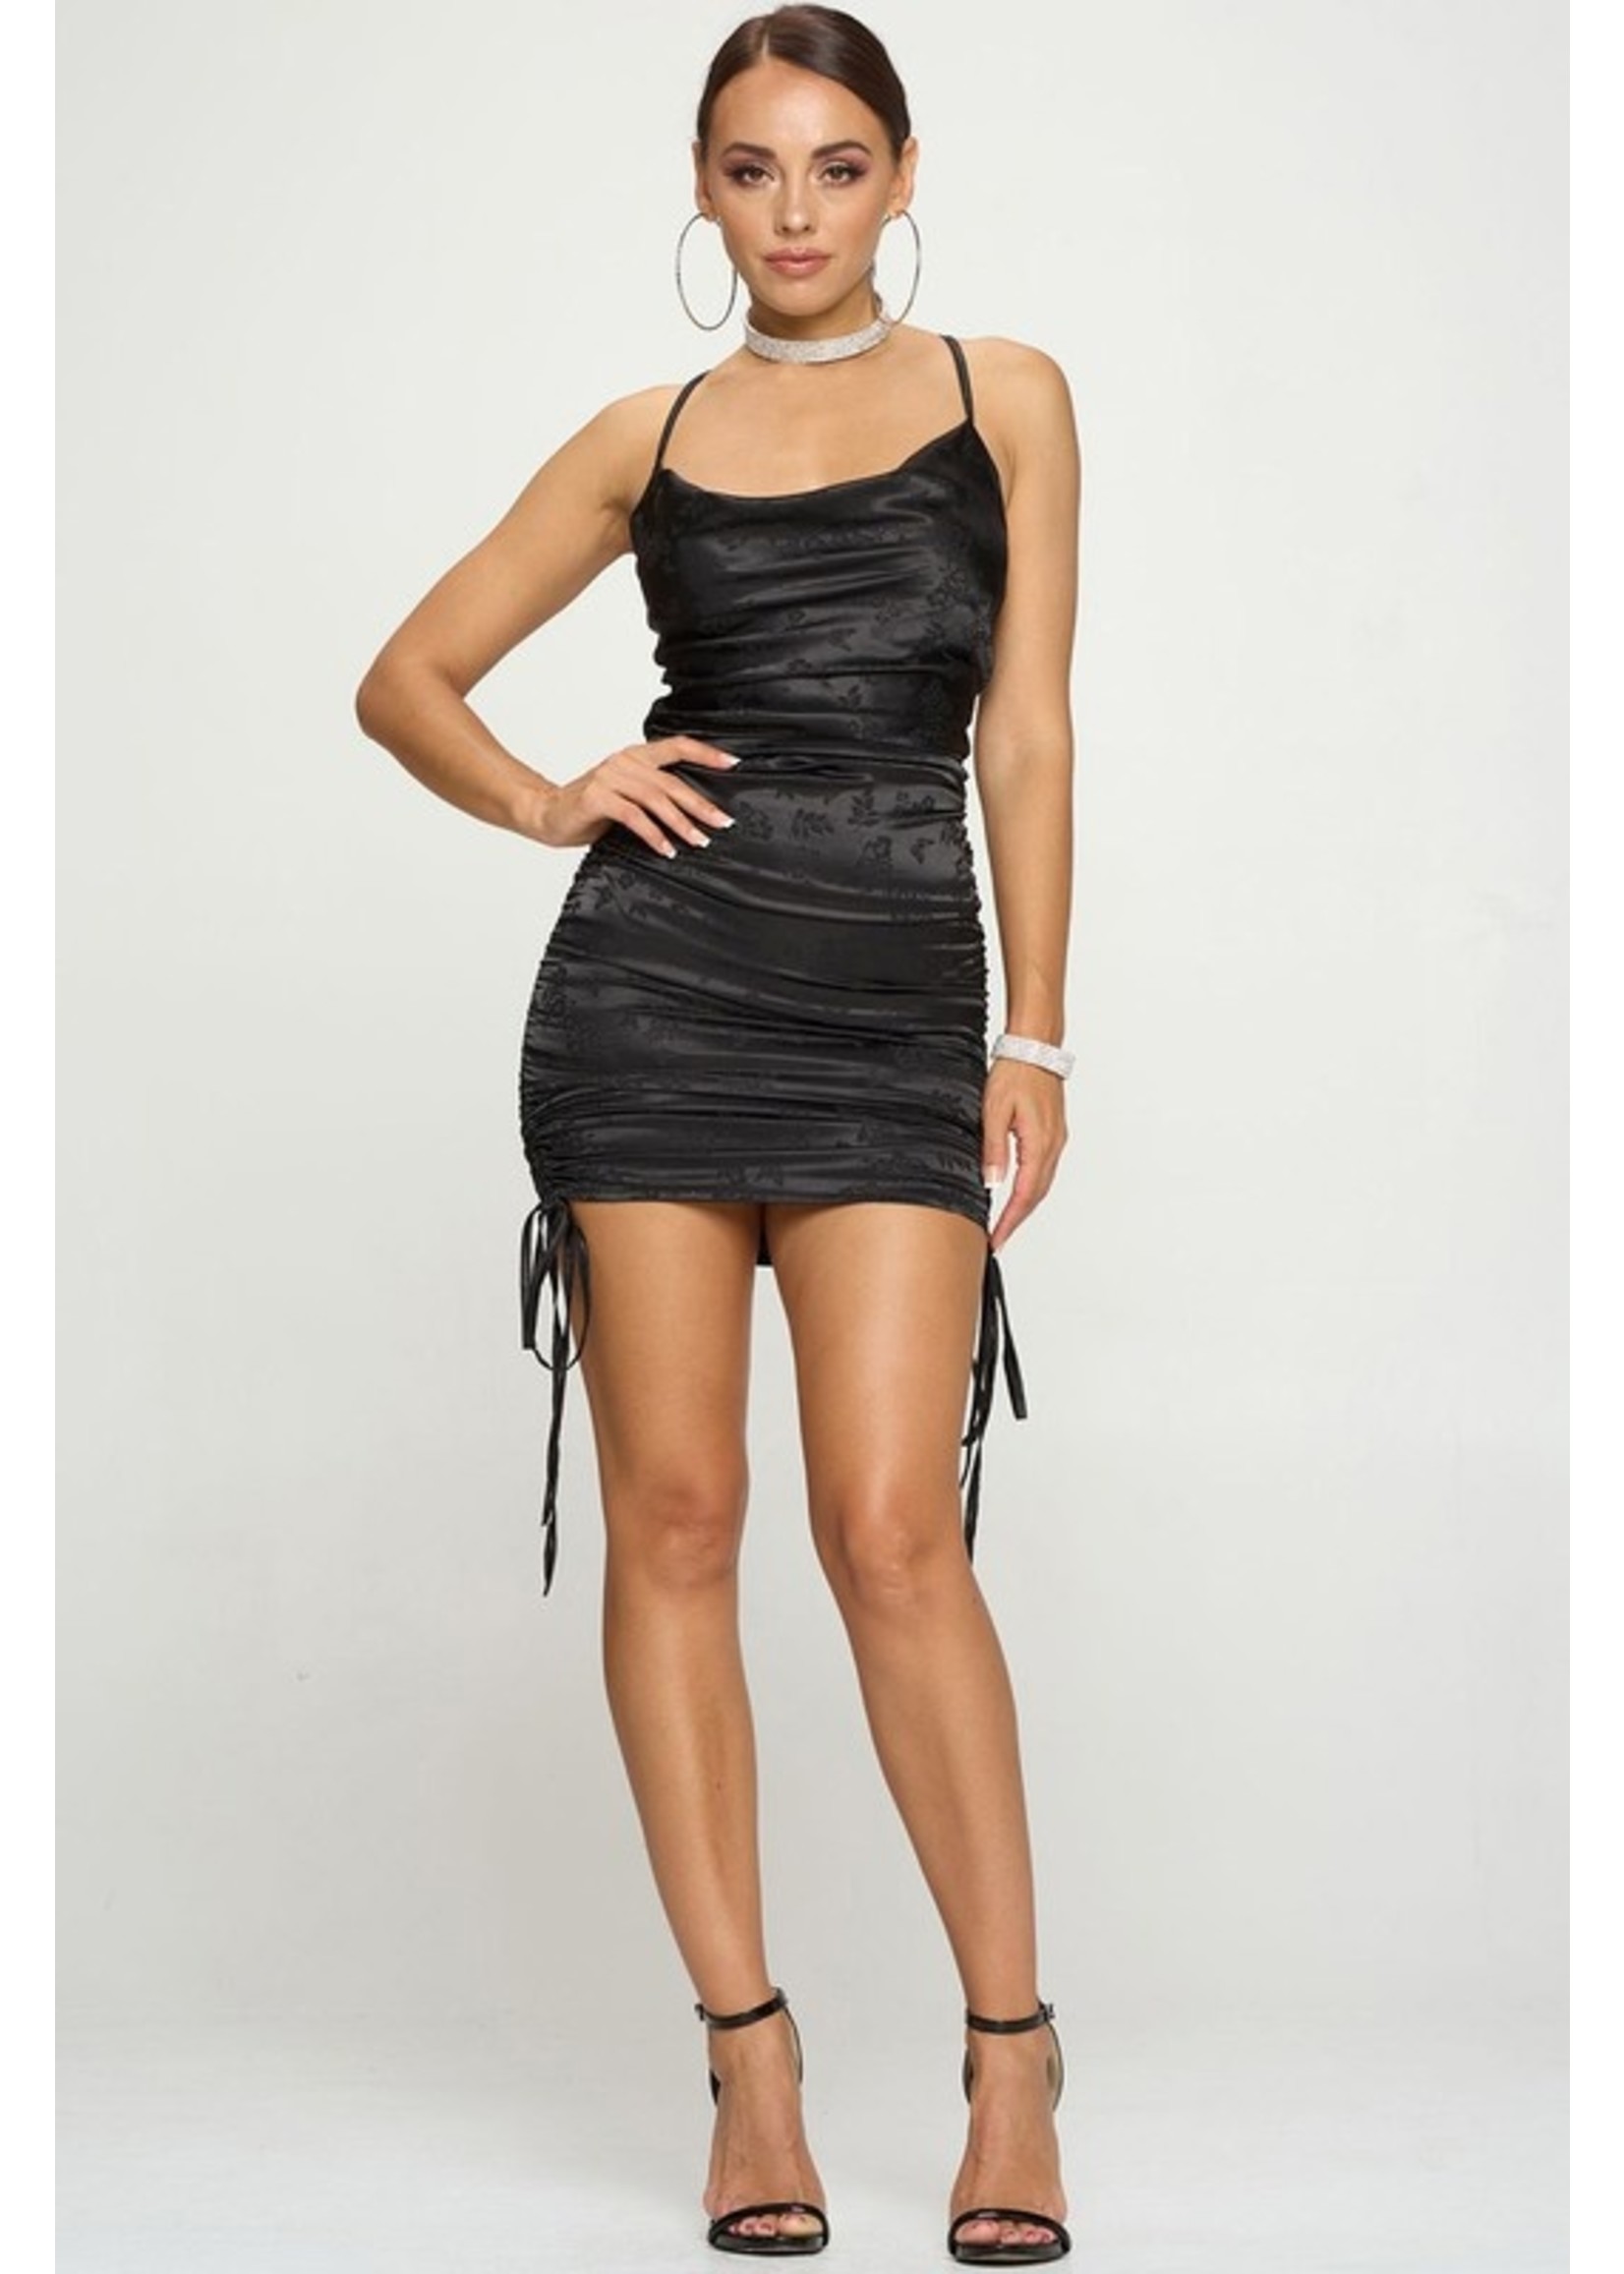 Oh Yes Stand Strong Dress Black